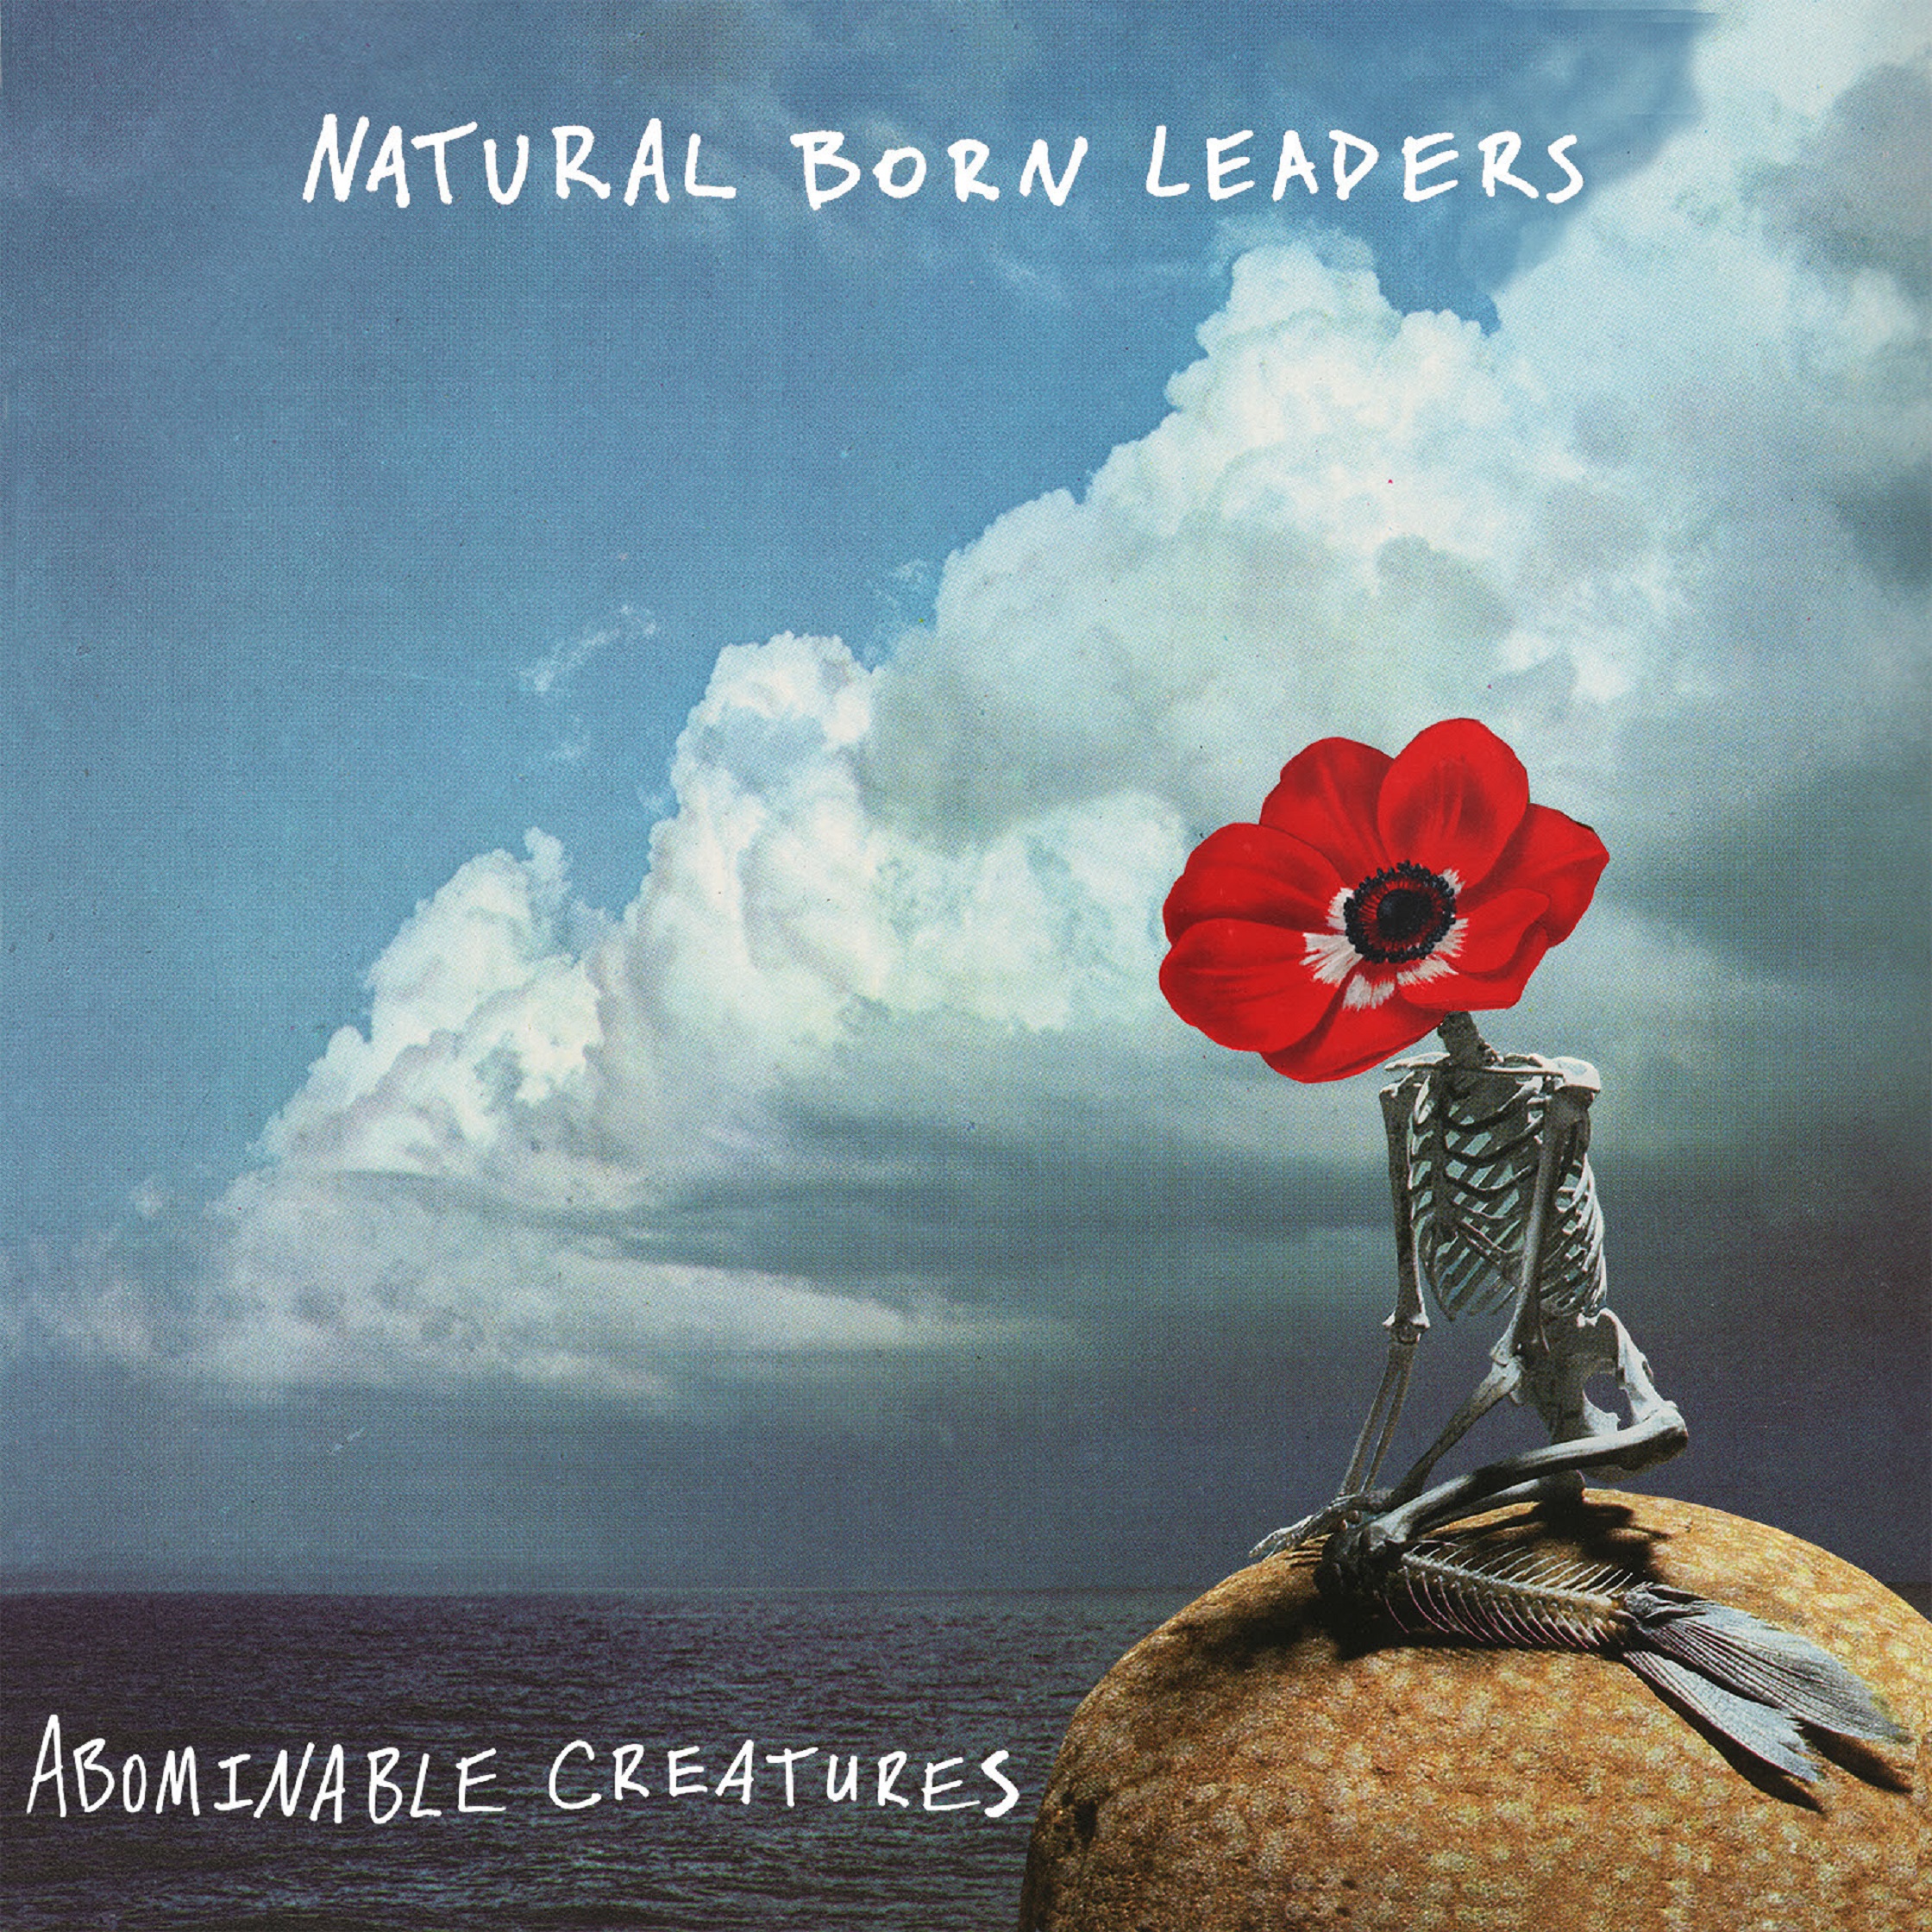 Natural Born Leaders Drop Title Track "Abominable Creatures" Off Sophomore Release